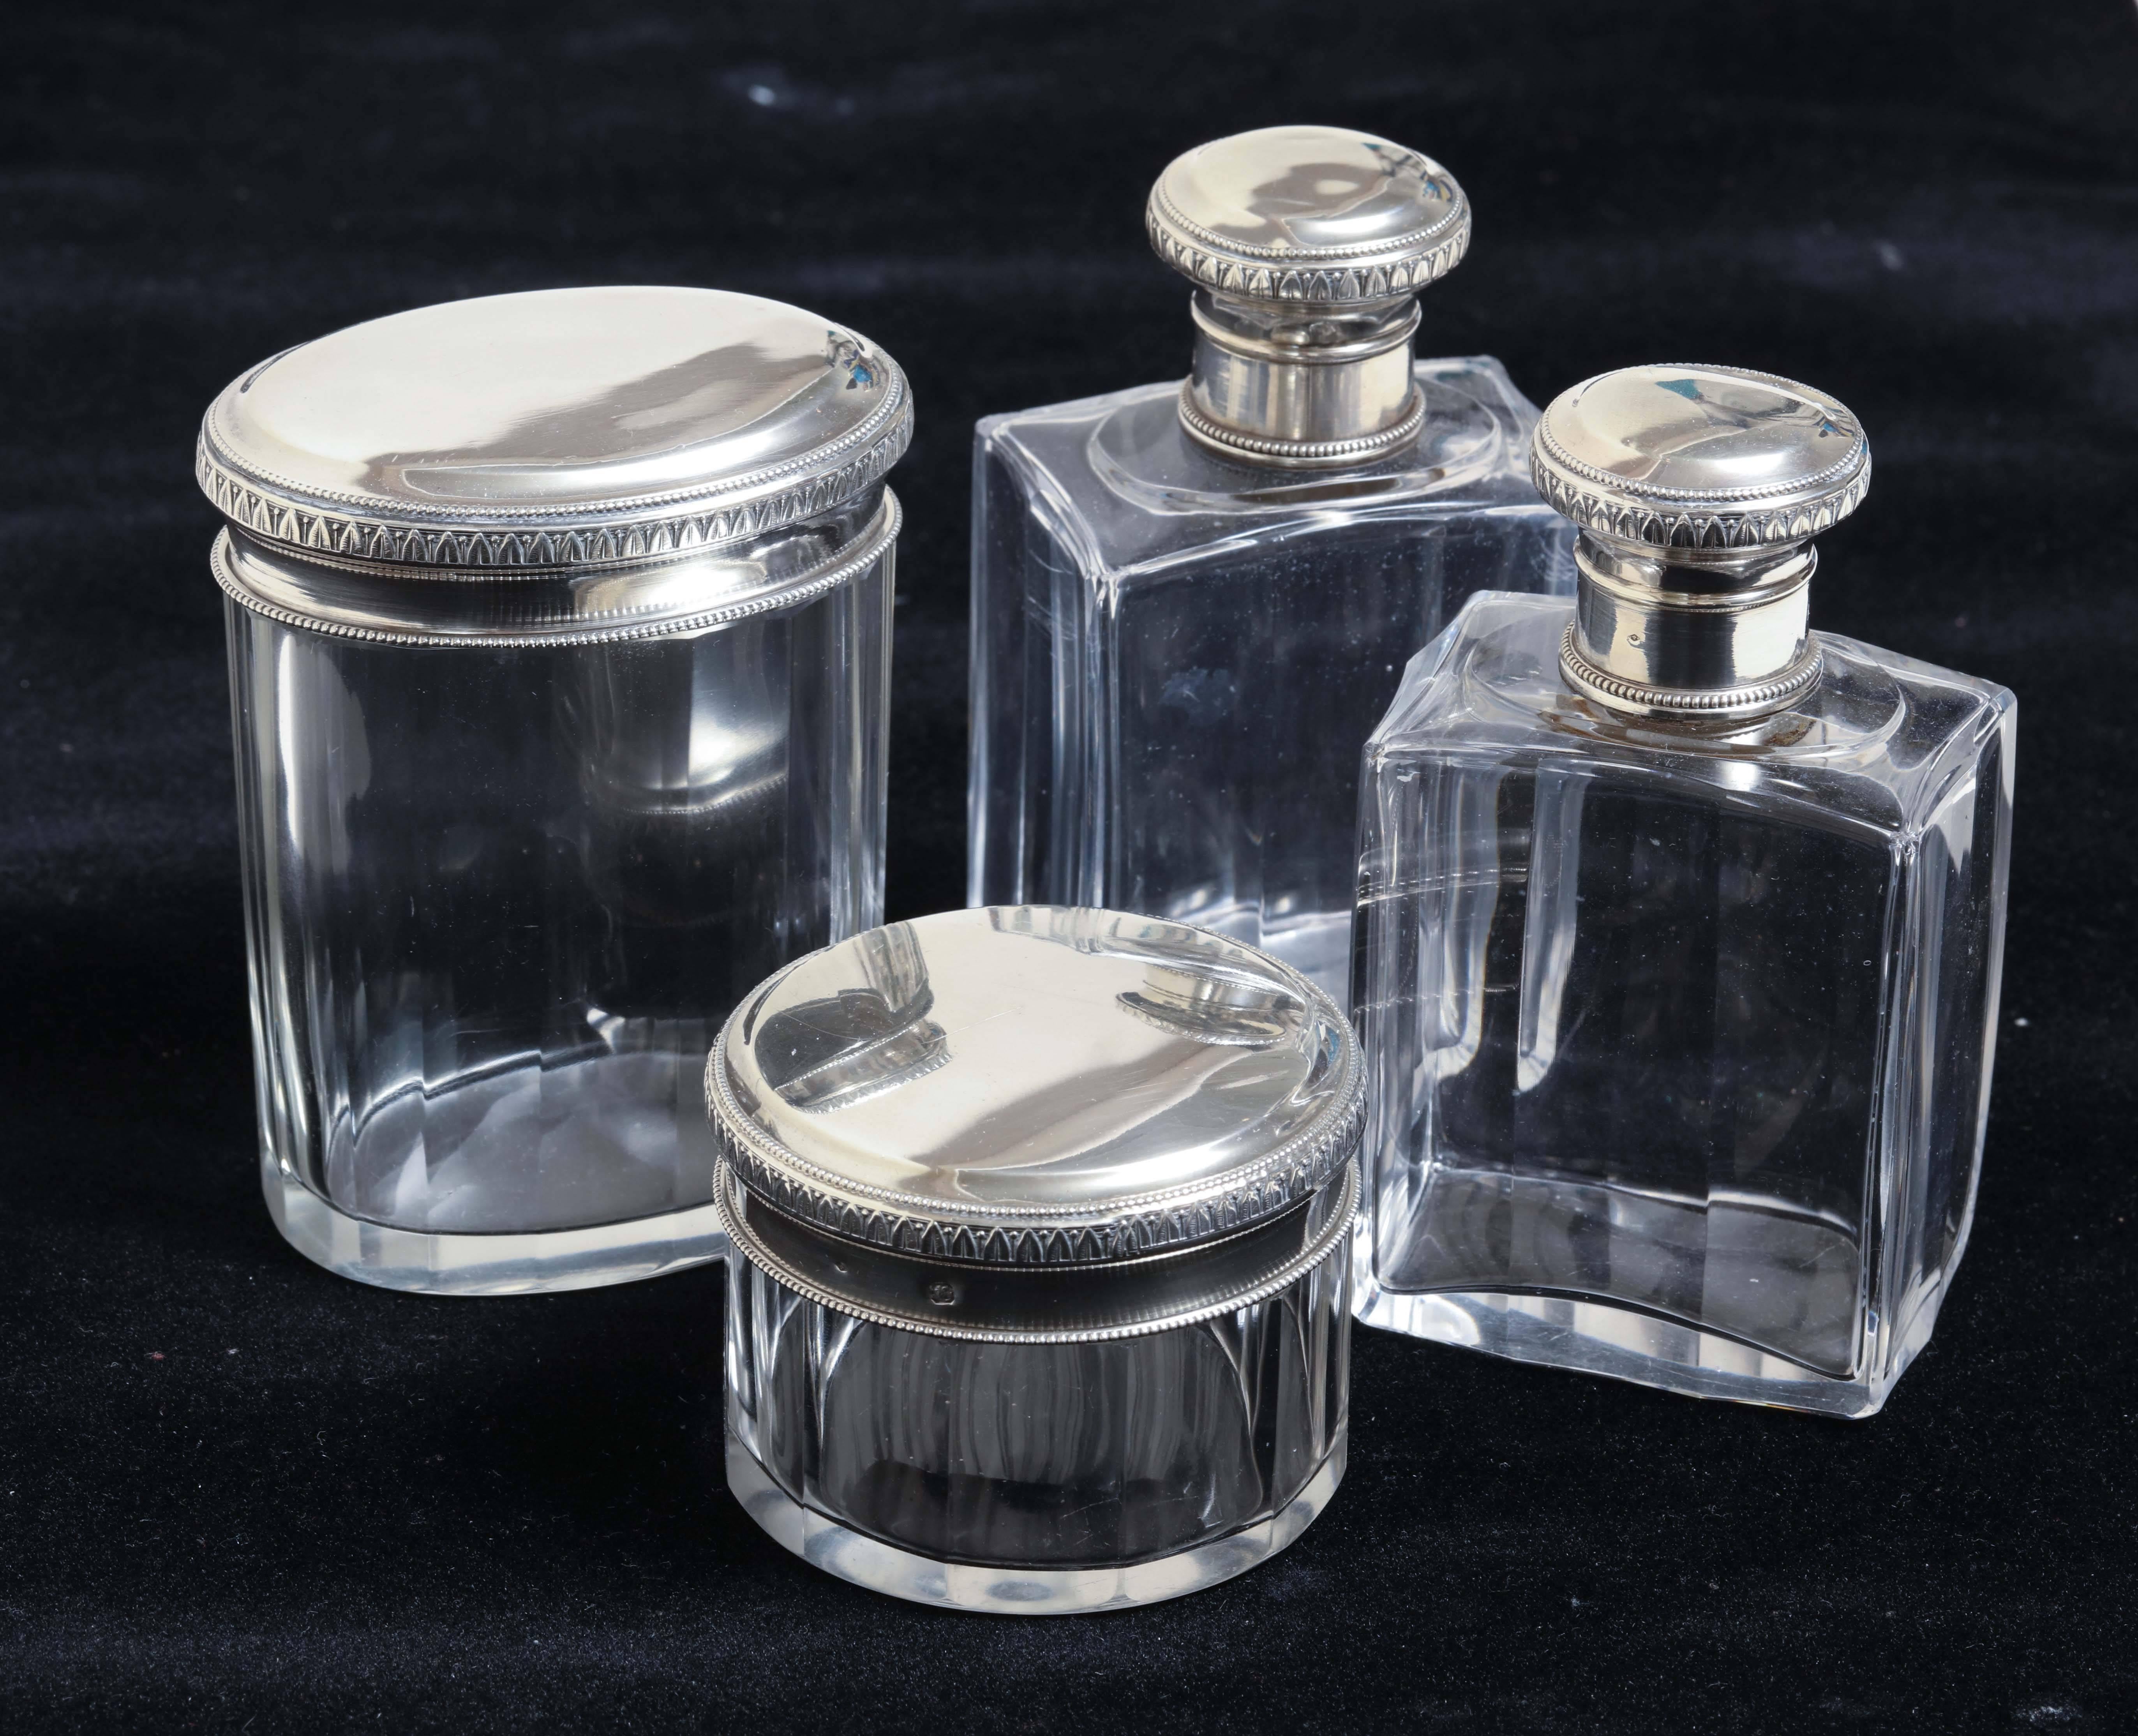 Measures: Circular jar – 2 1/8” high; 2 5/8” diameter.
 Oval Jar – 3 7/8” high; 2 7/8” X 2 ¼”.
 Perfume bottles (2) – 4 1/8” high; 2 3/8” X 1 ½”.

Impressed with Minerve for 950 silver/ unidentified maker’s poincon.

(Price shown is reduced